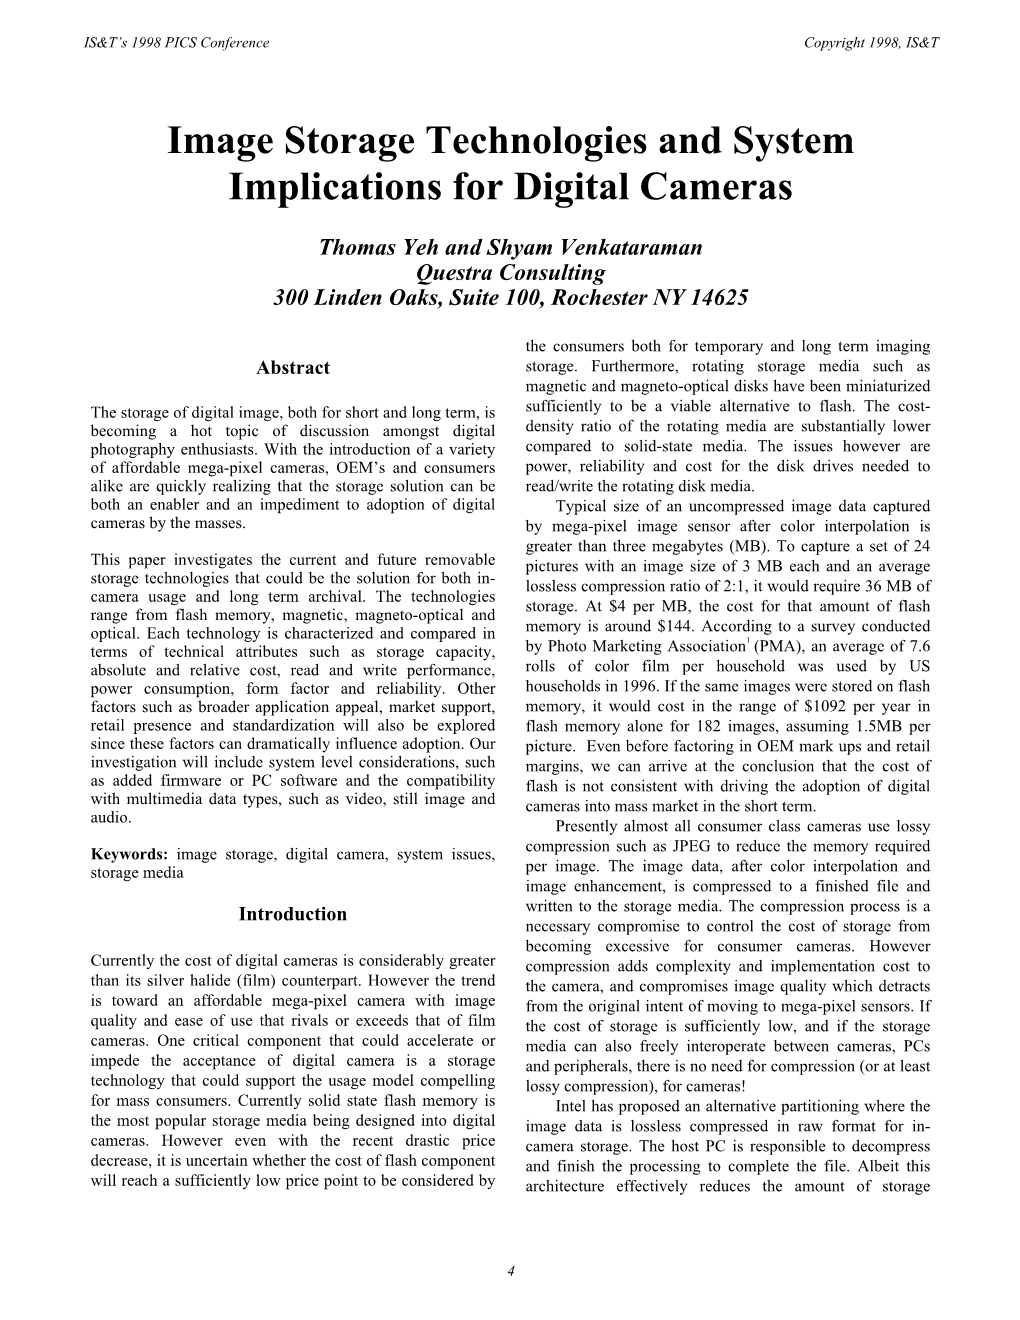 Image Storage Technologies and System Implications for Digital Cameras